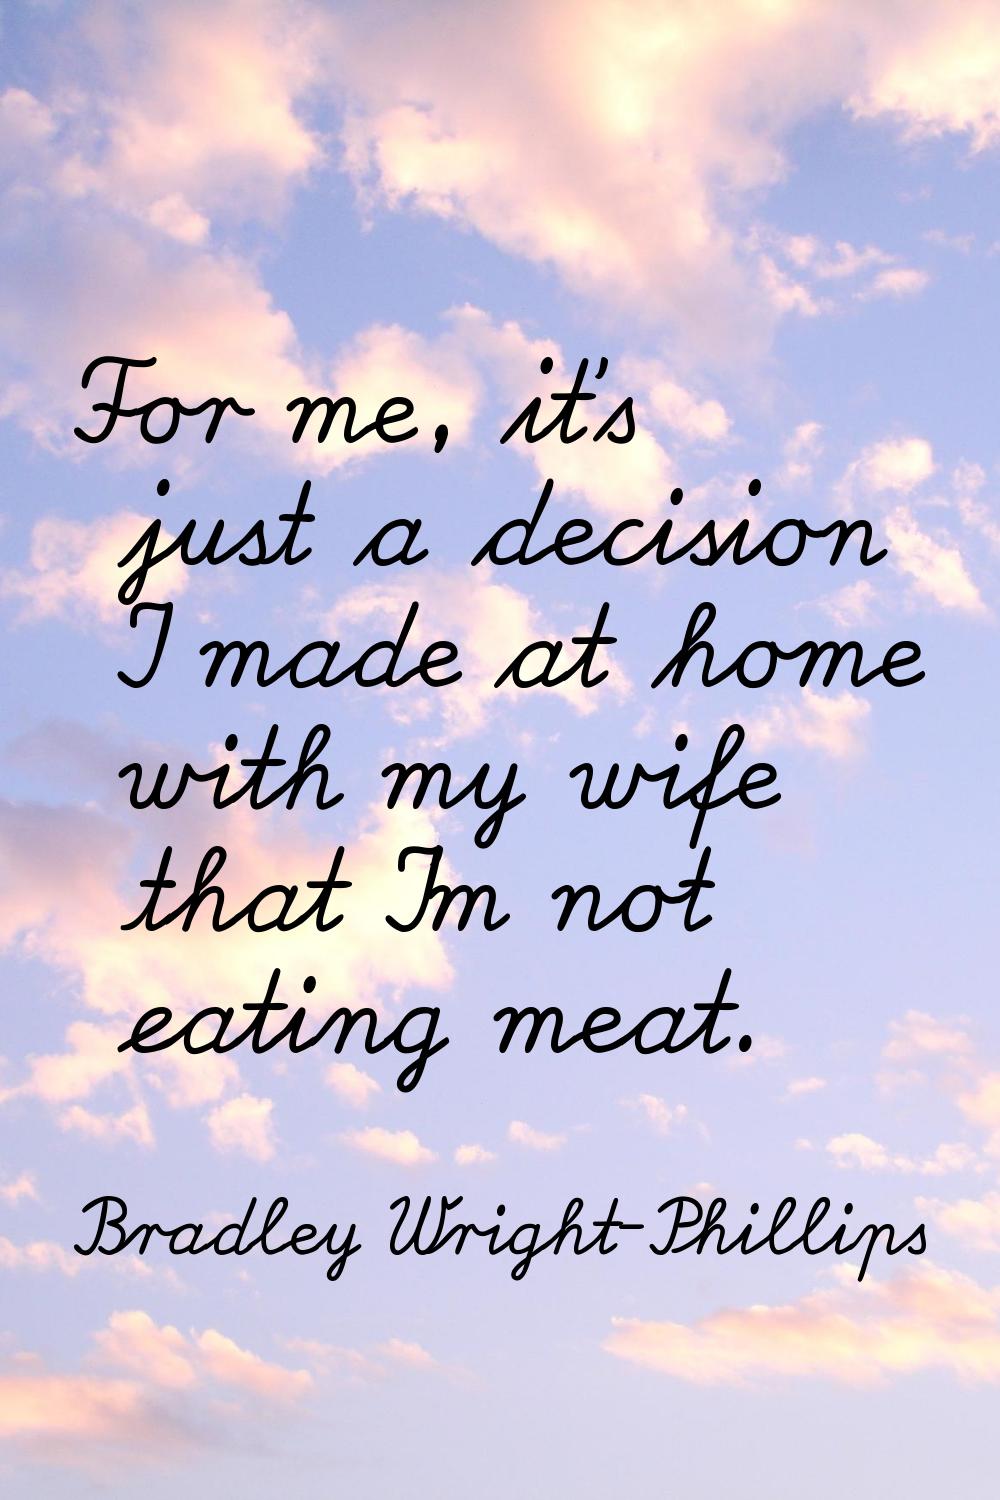 For me, it's just a decision I made at home with my wife that I'm not eating meat.